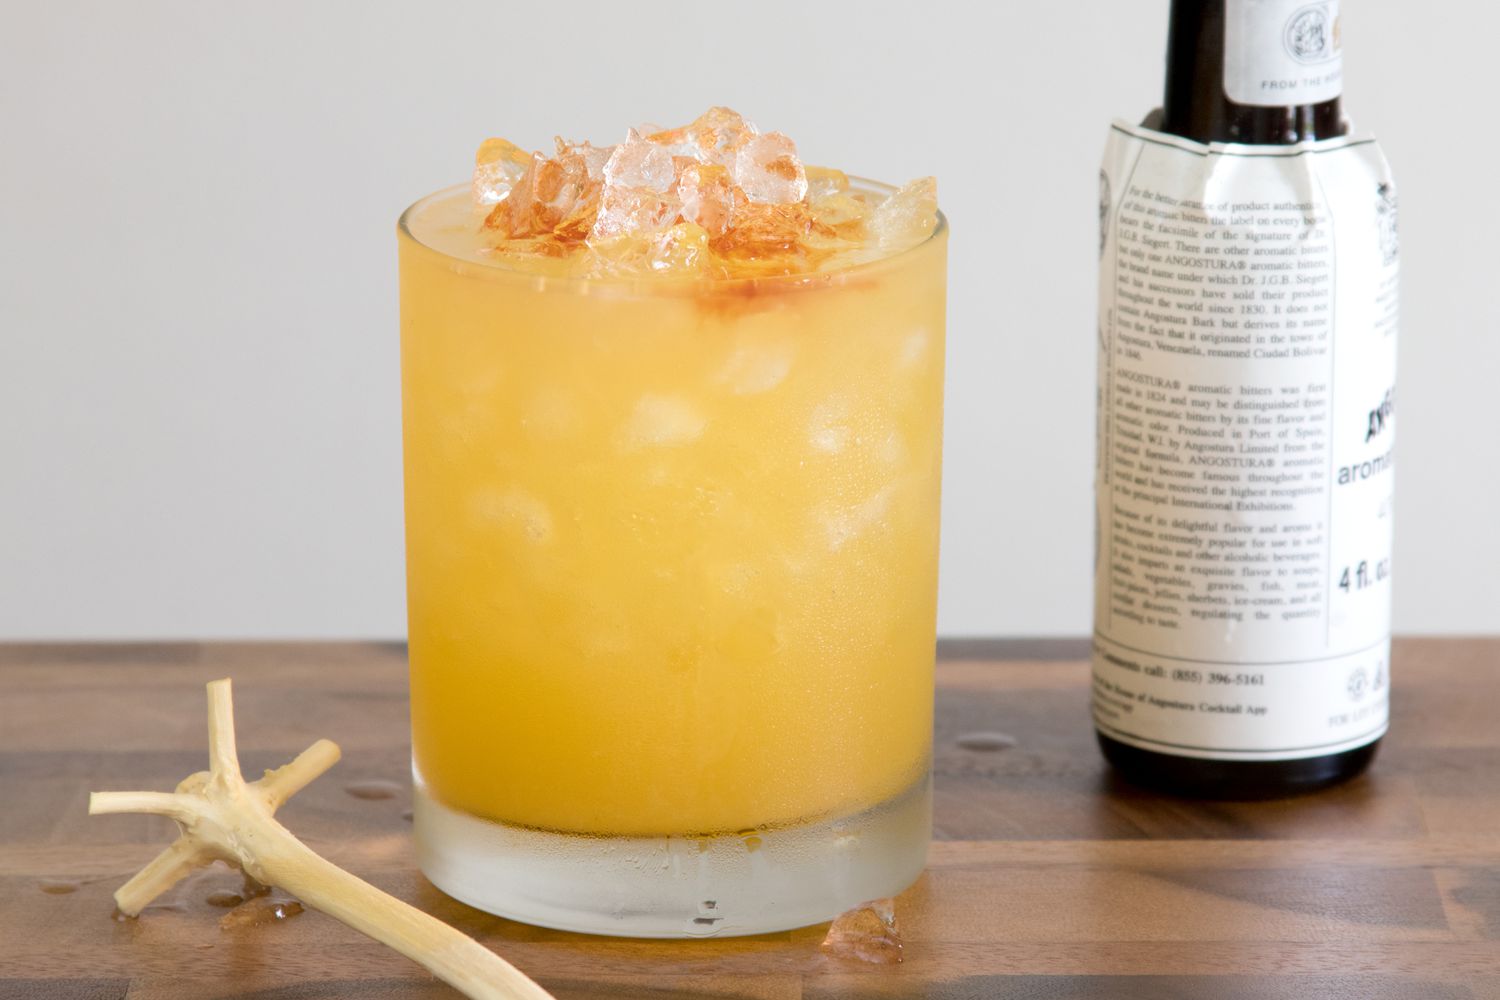 Adding Bitters to a Rum Swizzle Cocktail